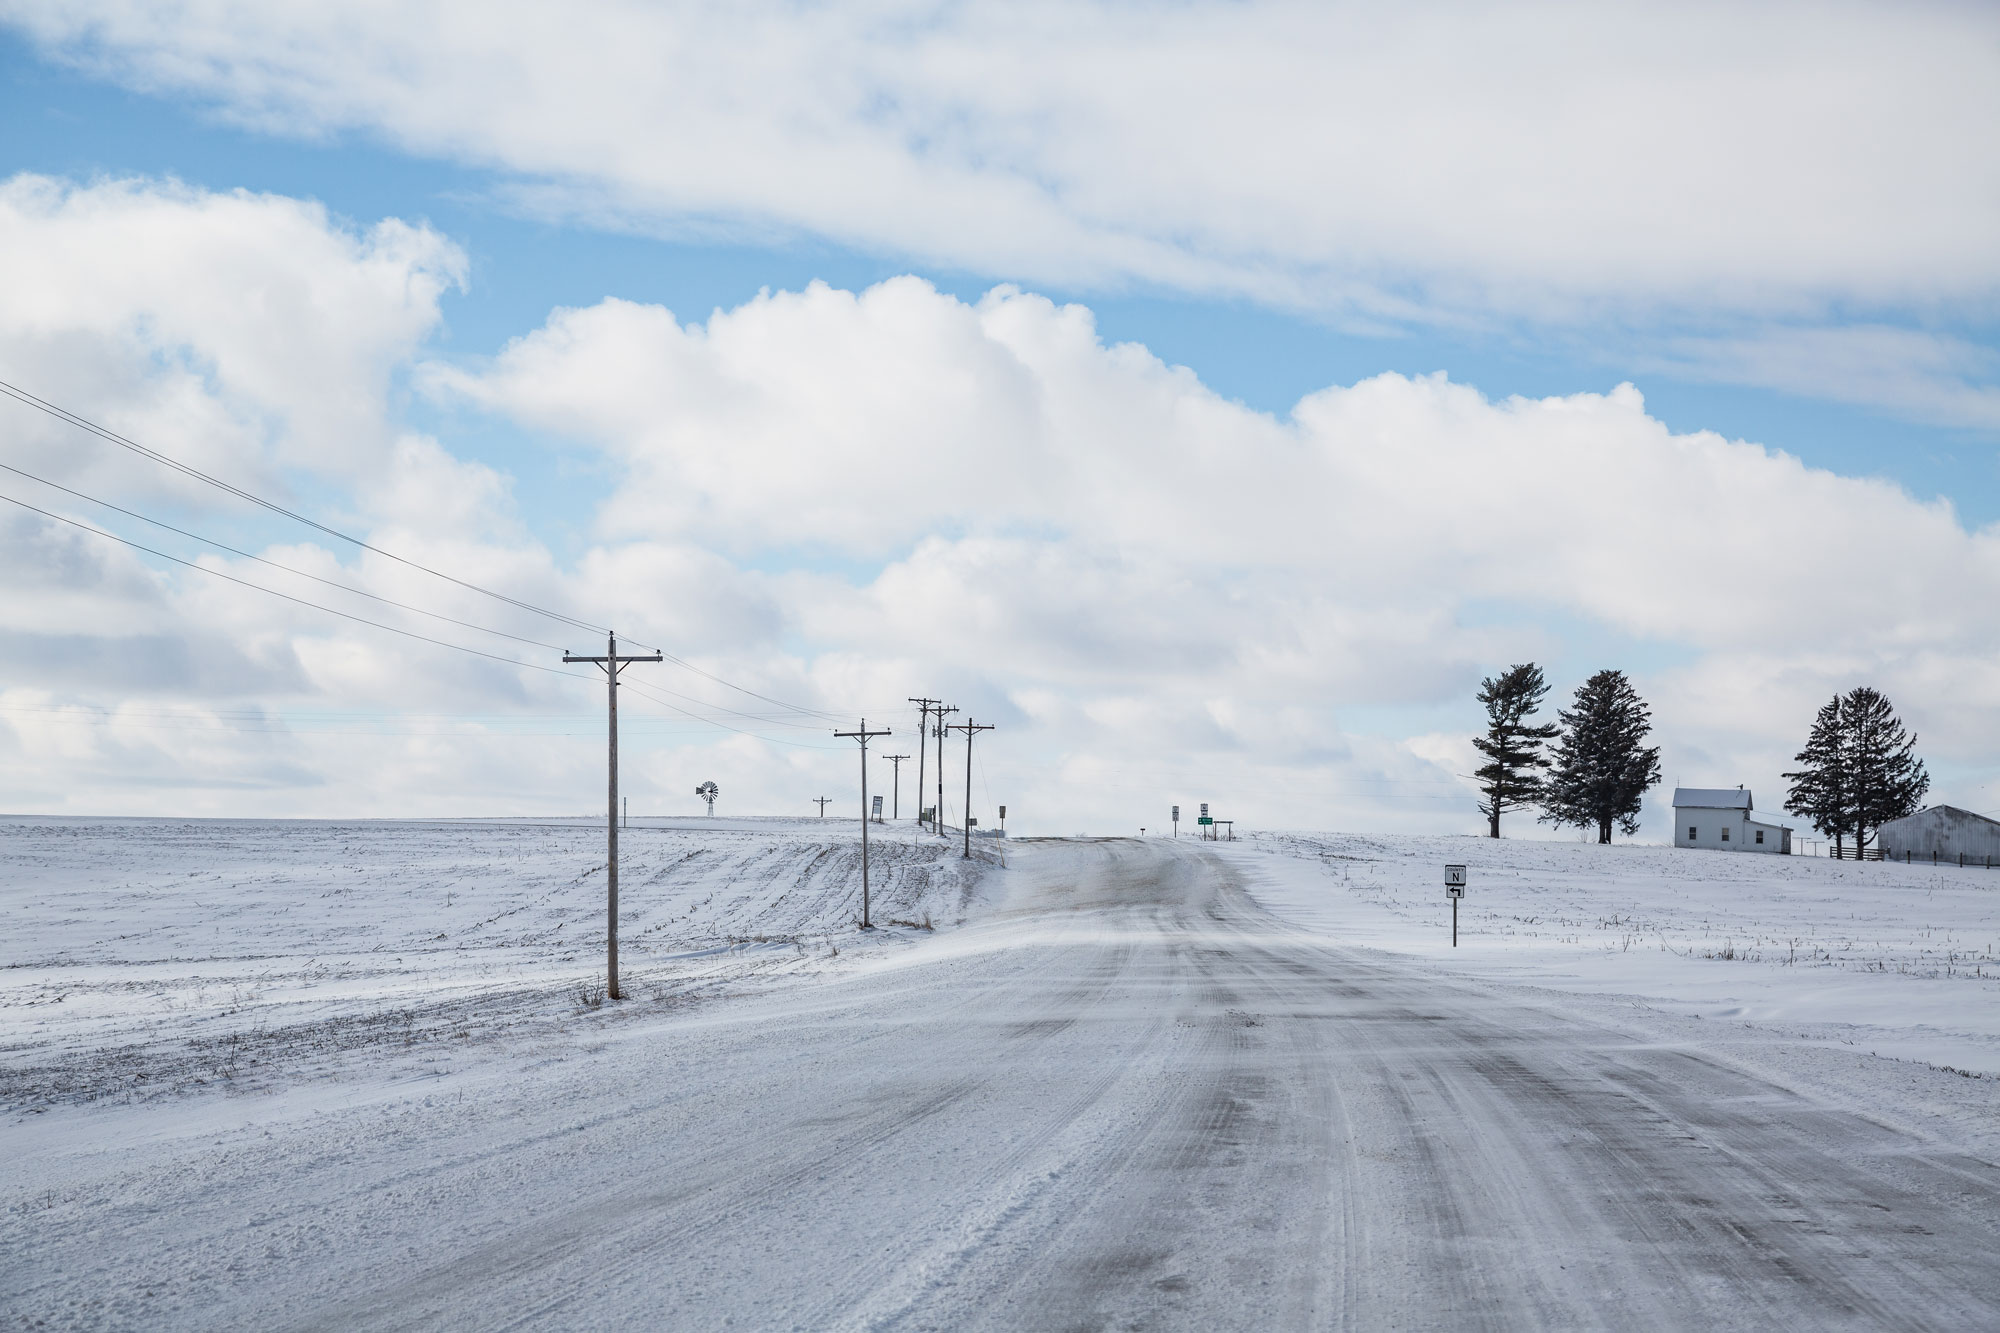 Photograph of farmland in Potosi, Wisconsin during the winter. The photo shows a road running toward the crest of a shallow hill, flanked by field on either side. On the right side of the road at the top of the hill is a house and outbuilding with several coniferous trees. A thin layer of snow covers the fields and road. White streaks crossing the road horizontally indicate that snow is blowing over the road. Power lines on wooden poles parallel the left side of the road. The sky is blue with fluffy white clouds.